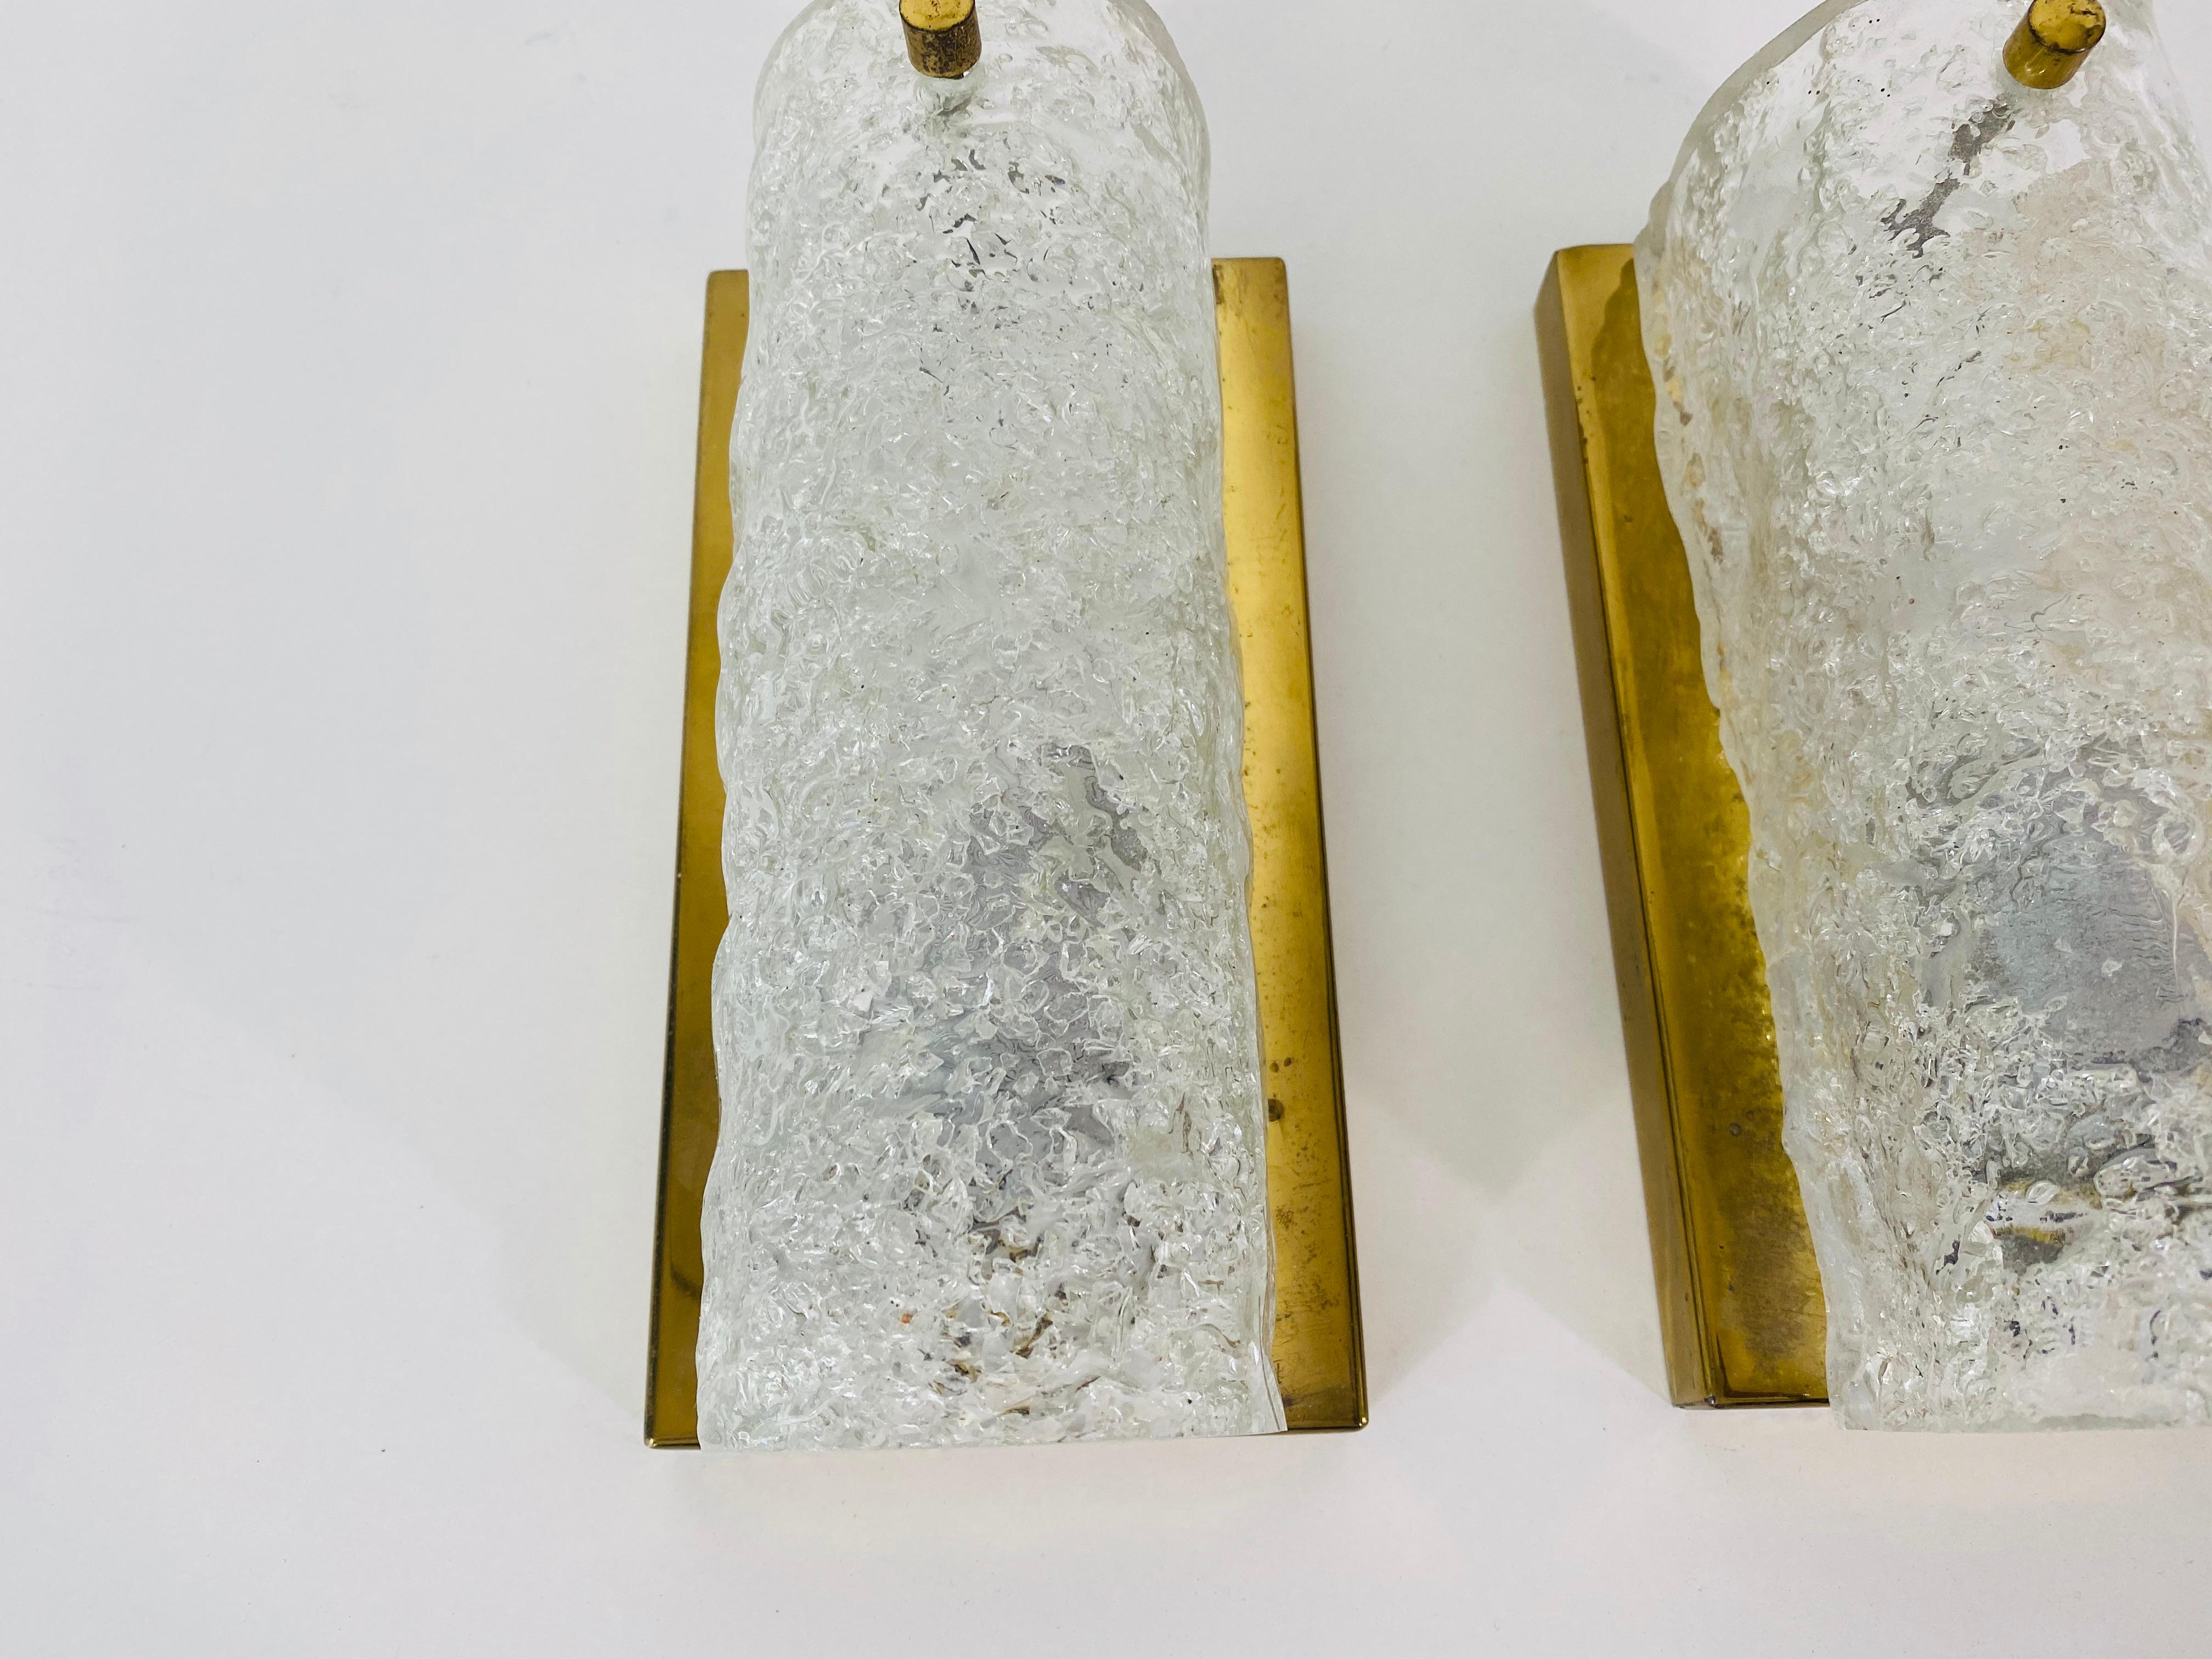 A pair of wall lamps by Hillebrand Leuchten made in Germany in the 1960s. It is fascinating with its rare glass shape. The bottom part of the lamp is made of brass.

The light requires one E14 light bulb. Very good vintage condition.

Free